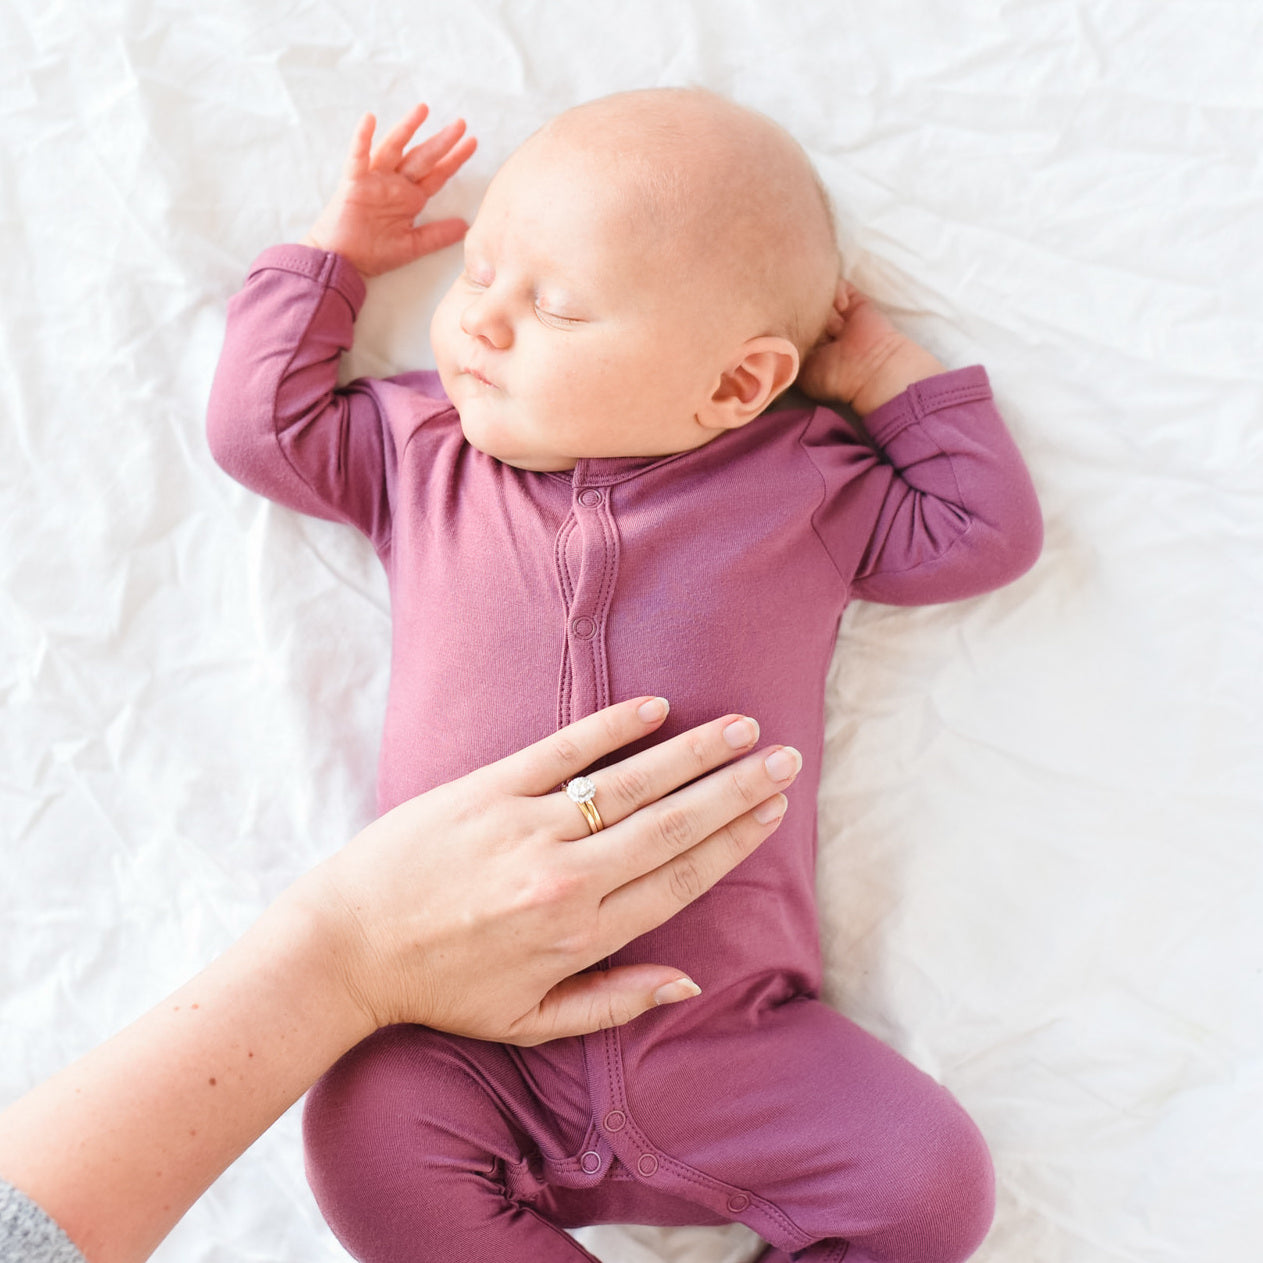 All About: Infant Massage